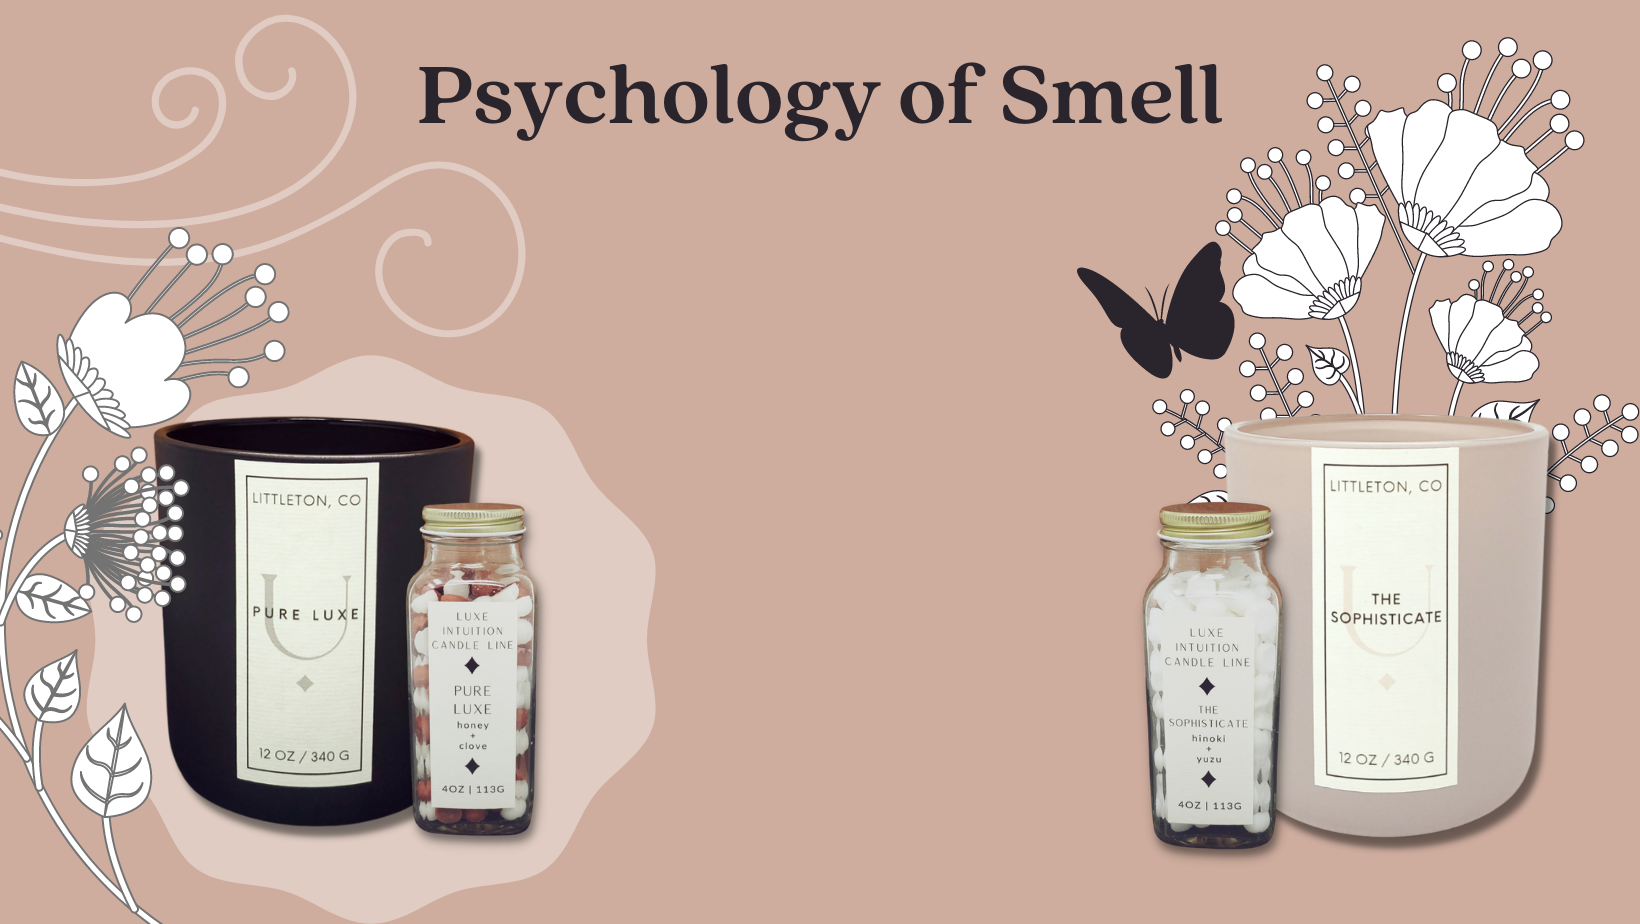 Psychology of Smell: The Power Of Scent